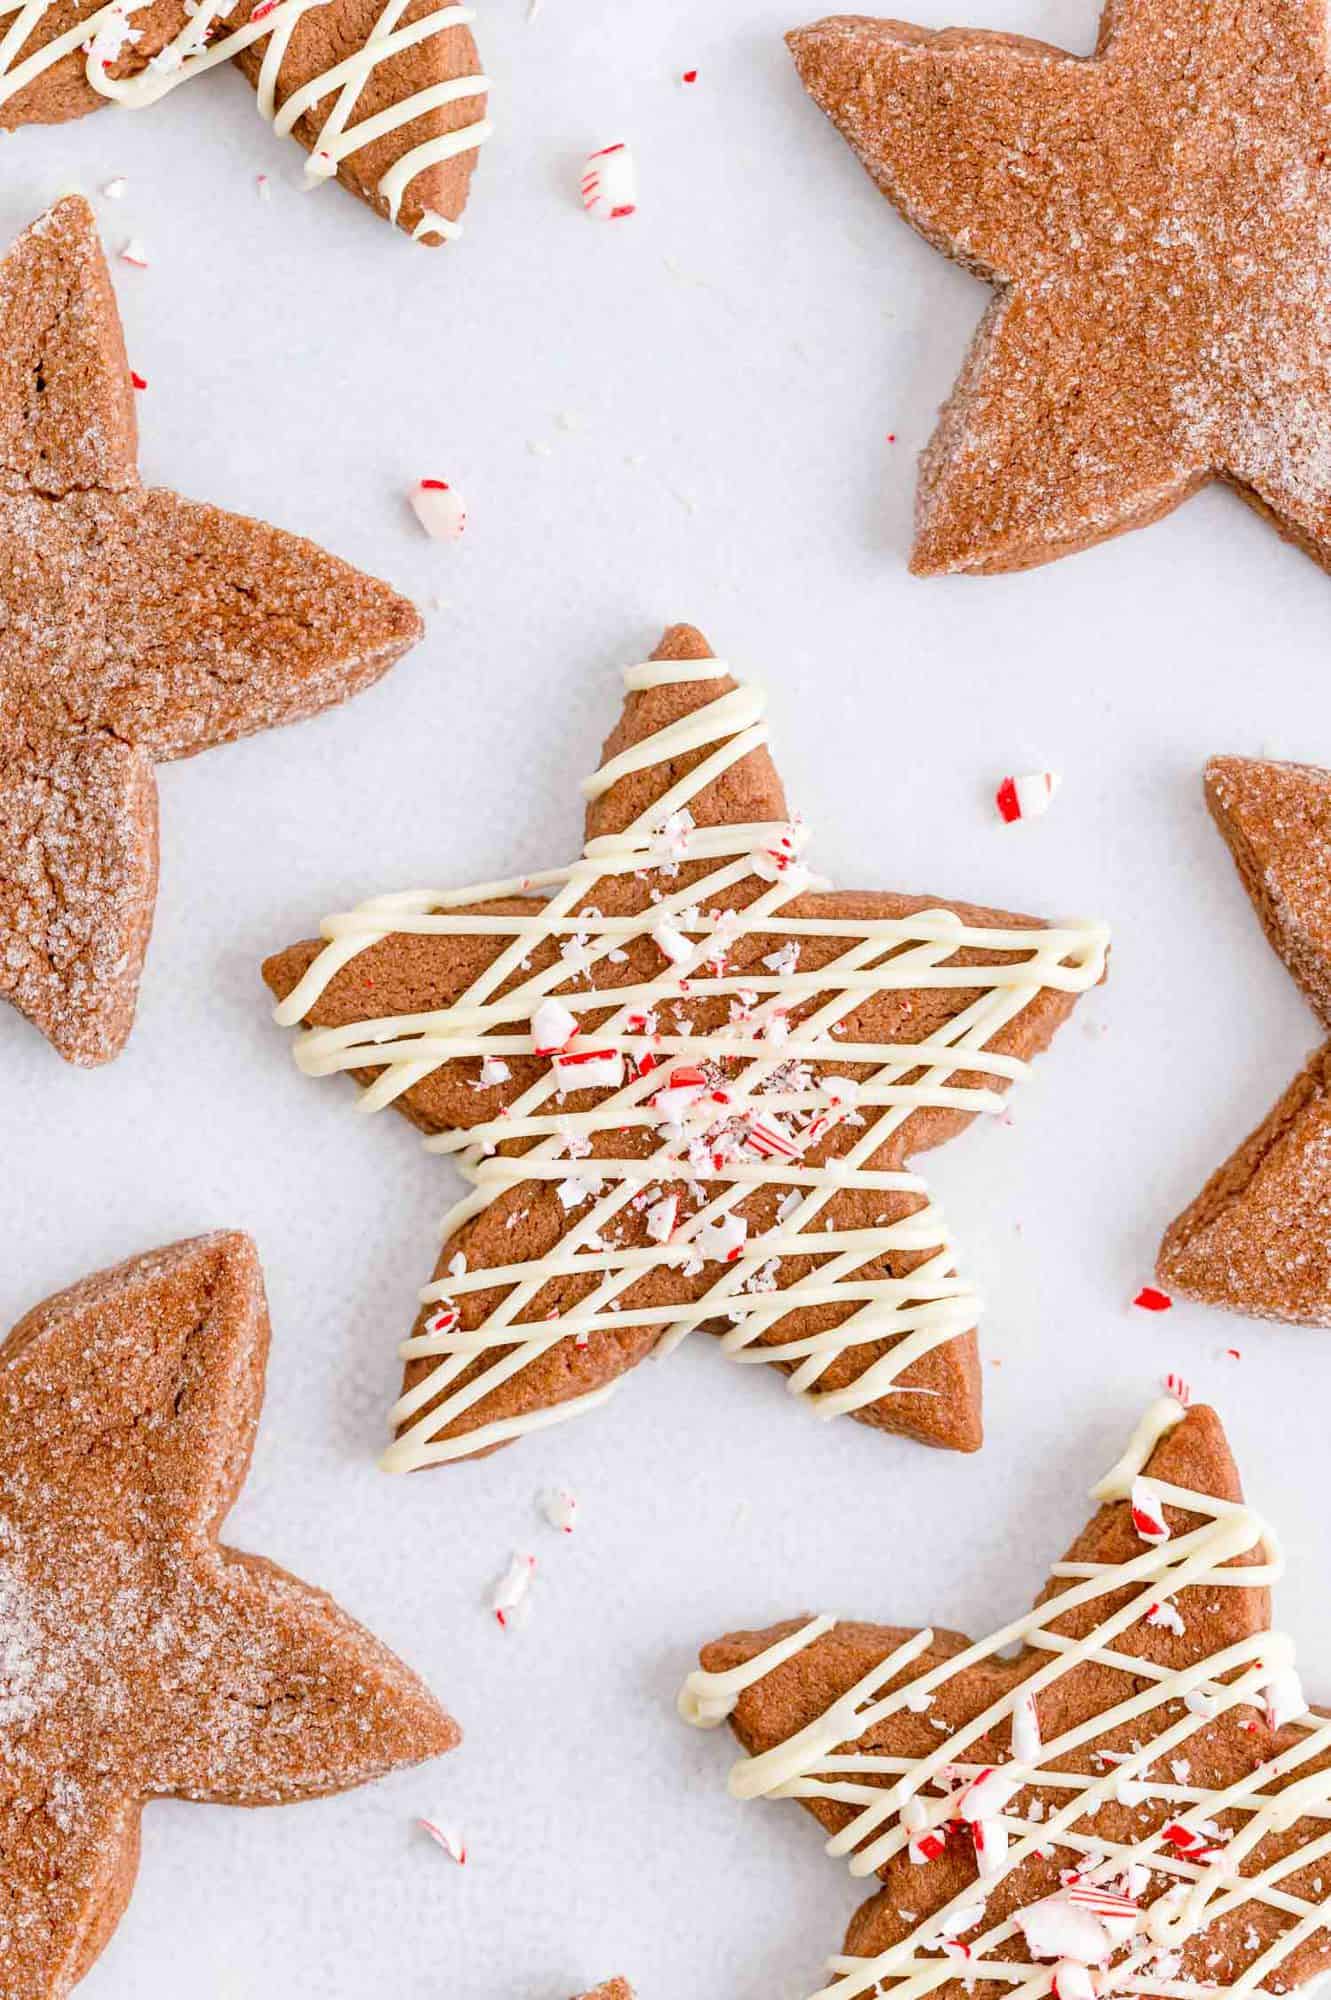 Chocolate peppermint sugar cookies cut into stars, some with white chocolate drizzle.